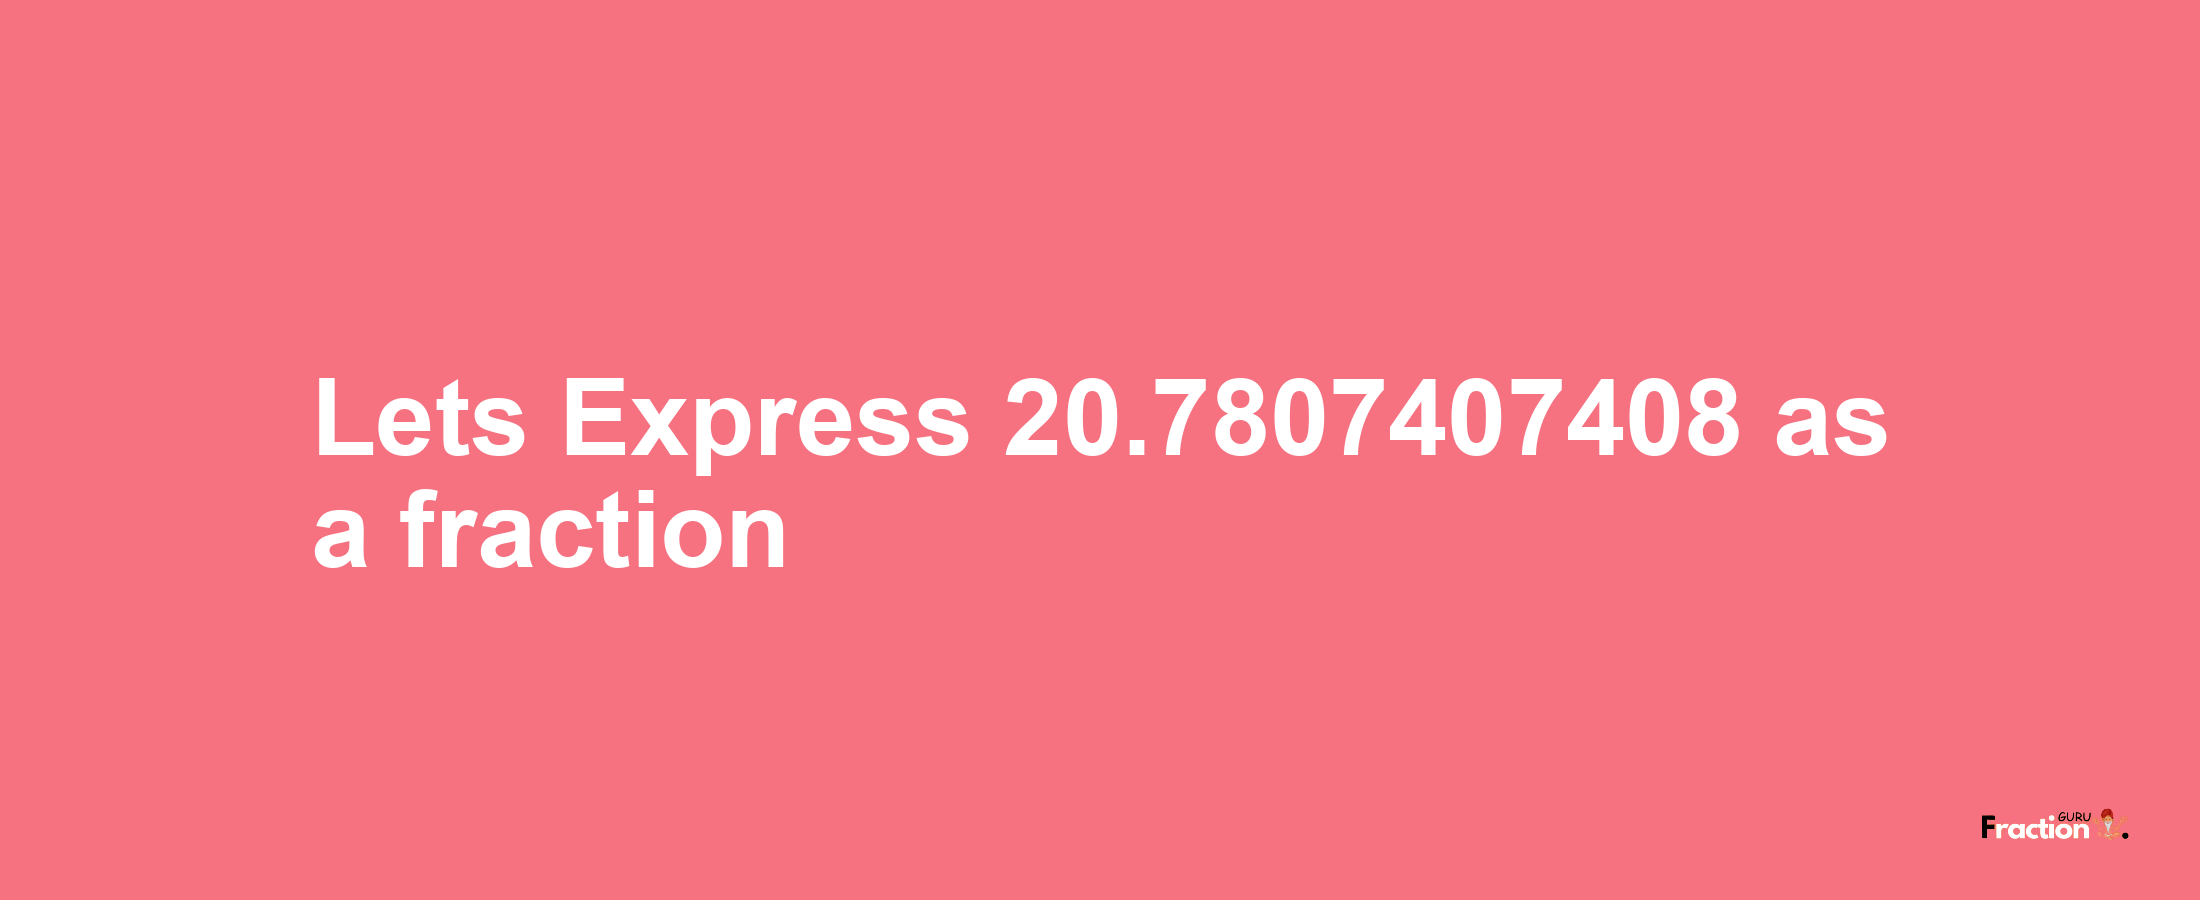 Lets Express 20.7807407408 as afraction